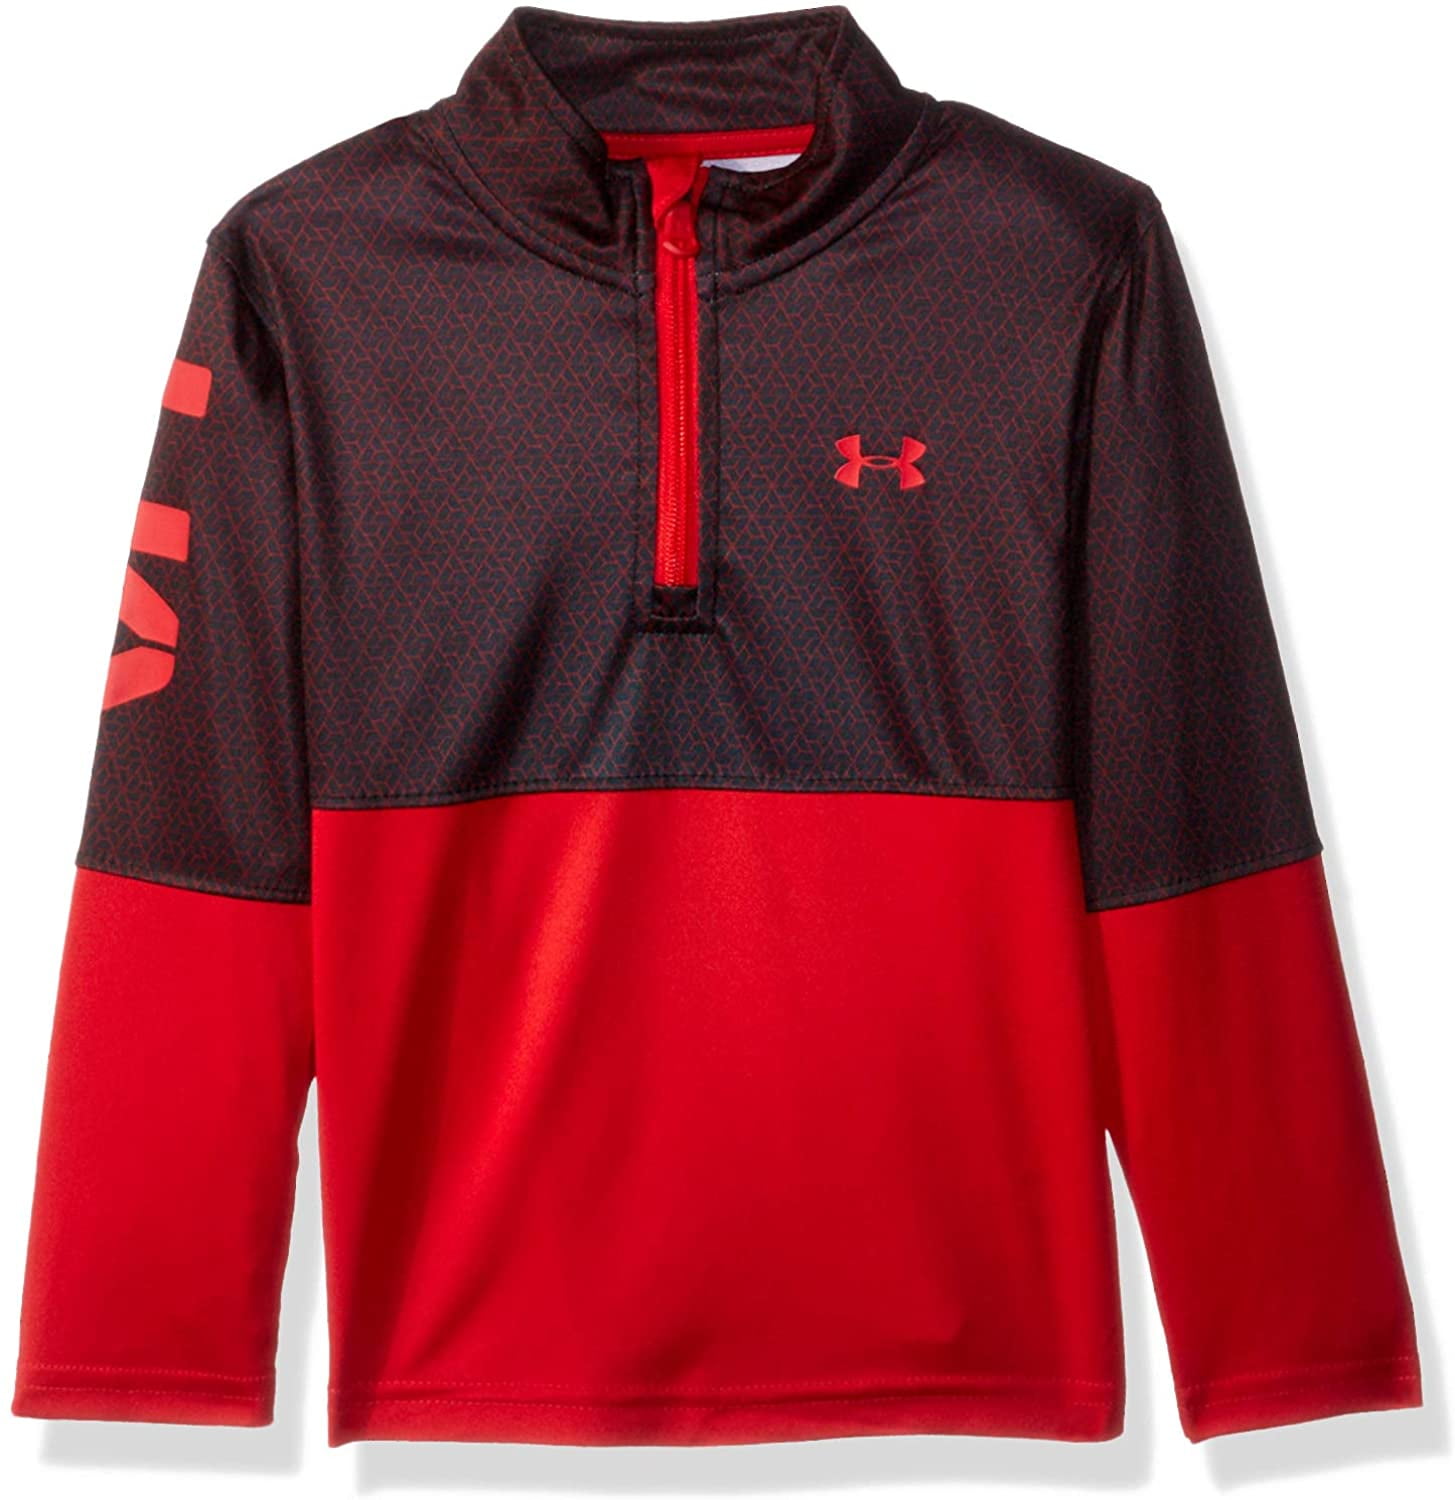 under armour jacket red